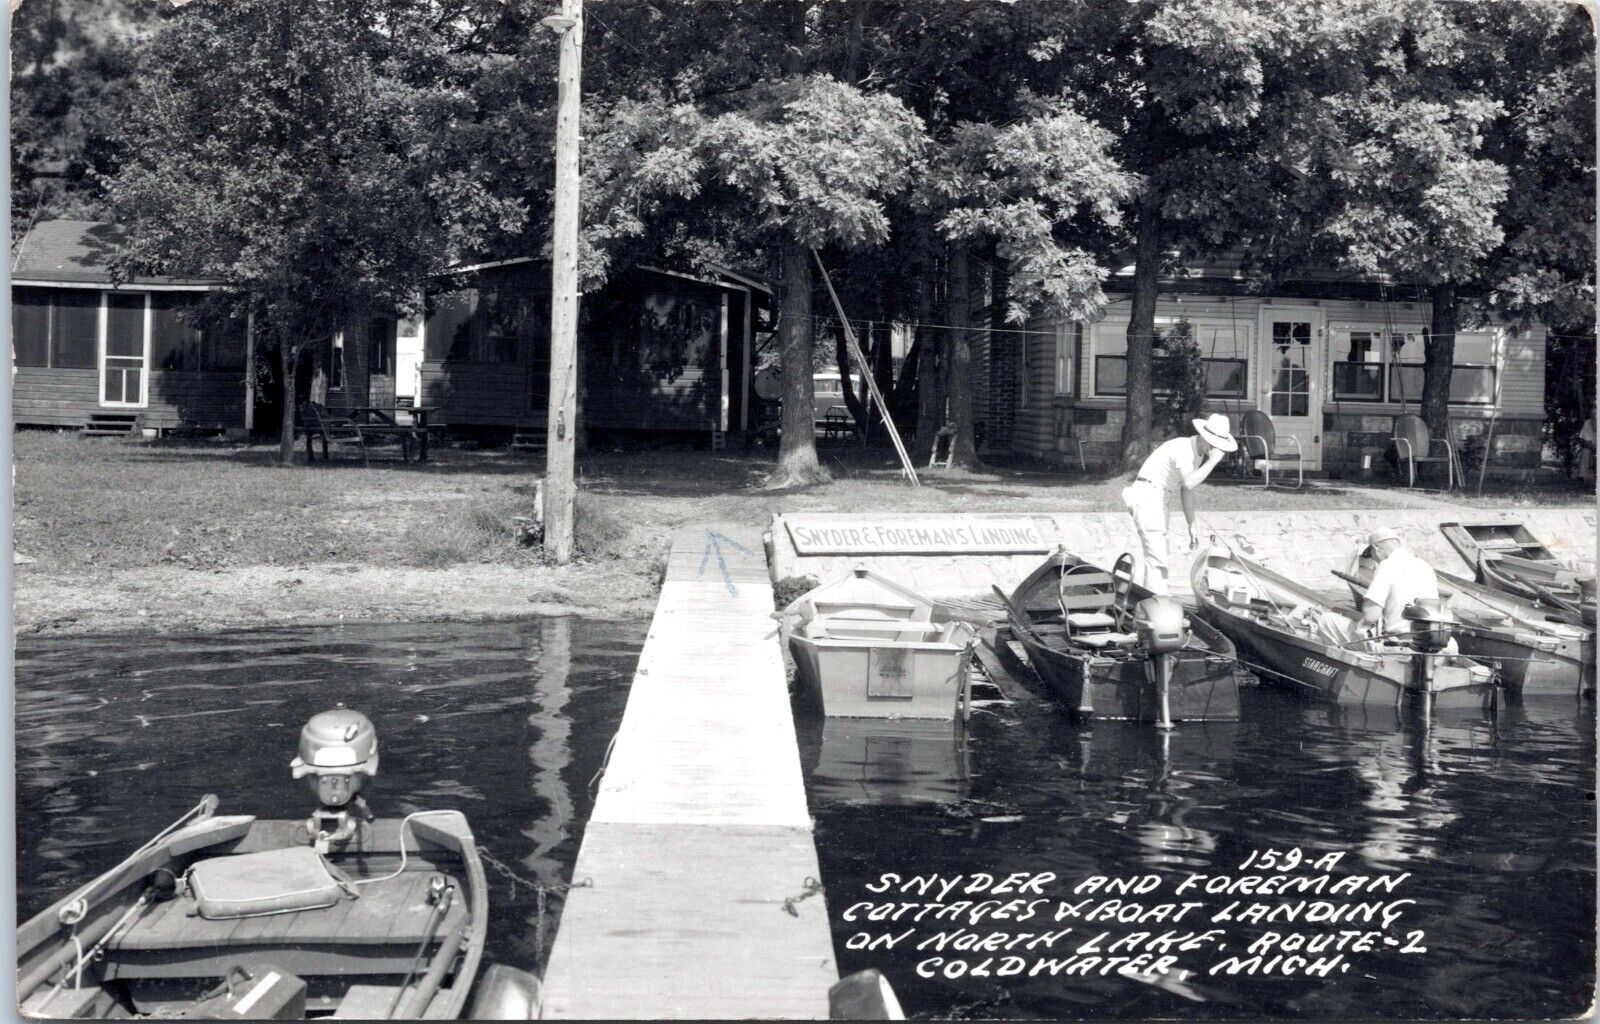 RPPC Snyder, Foreman Cottages, Boat Landing, Coldwater Michigan - Photo Postcard